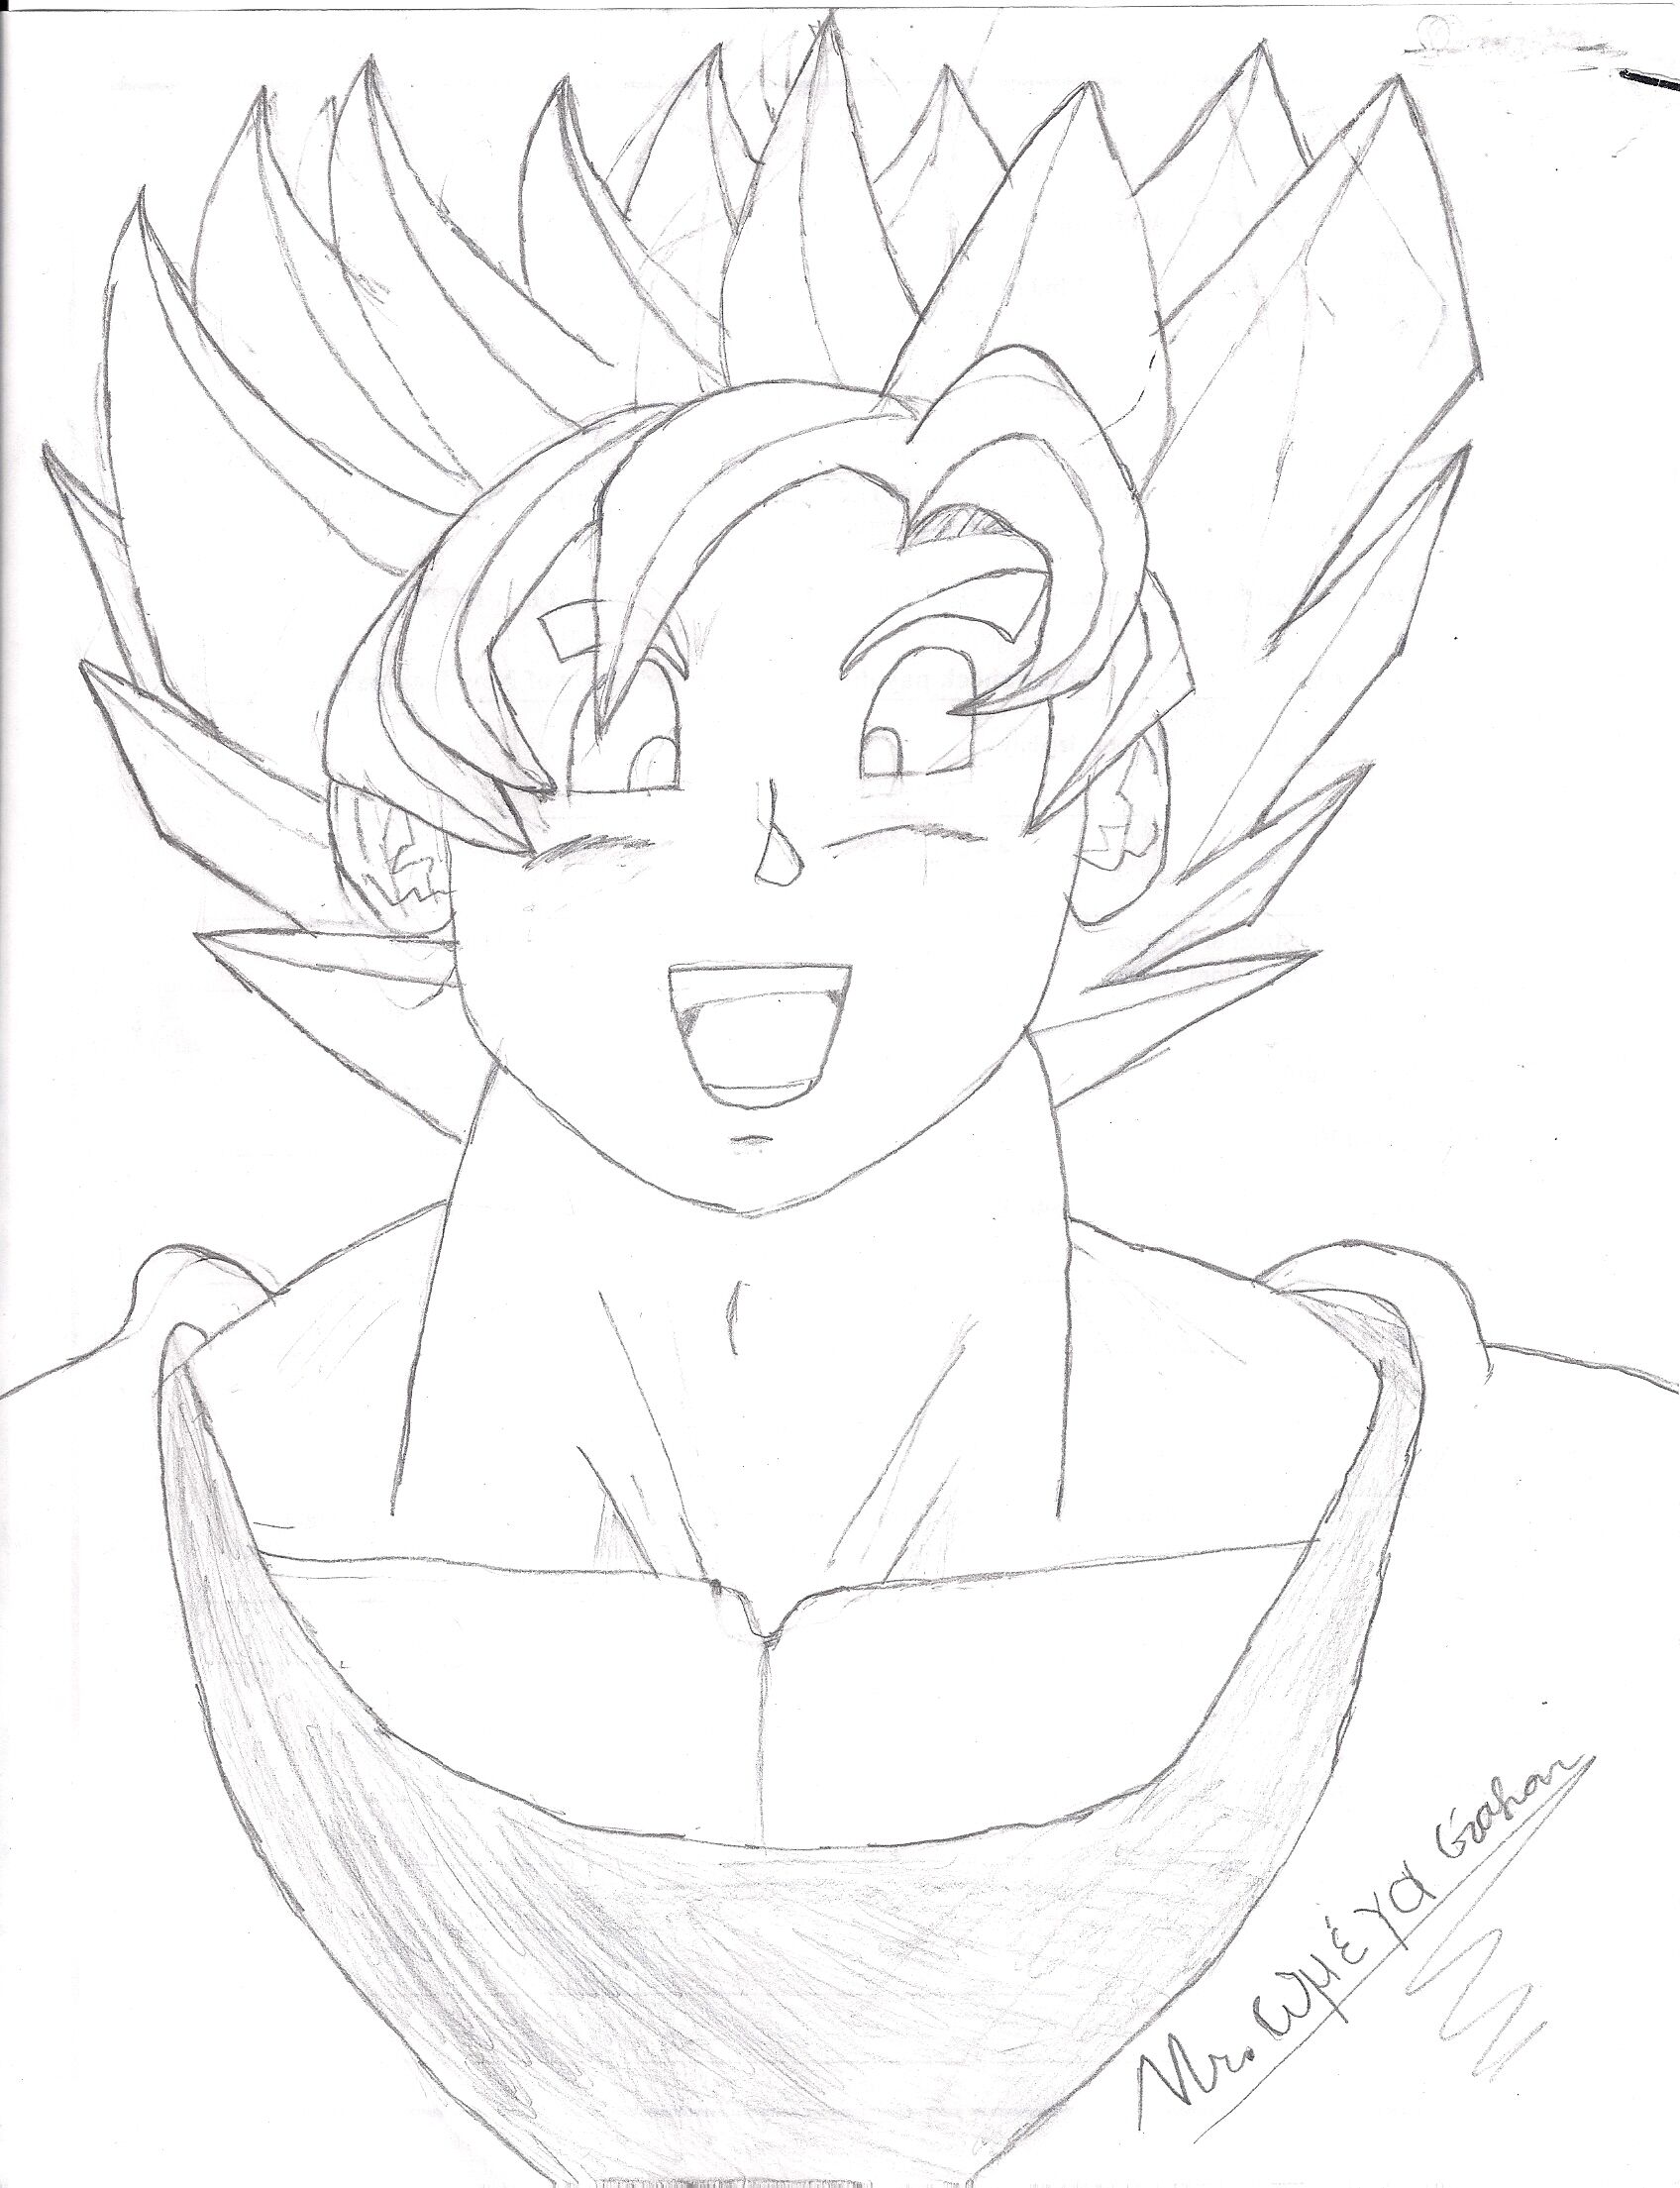 How to Draw 𝐃𝐫𝐚𝐠𝐨𝐧 𝐁𝐚𝐥𝐥 Z Super Characters: Learn to, anime dragon  ball z drawing - thirstymag.com